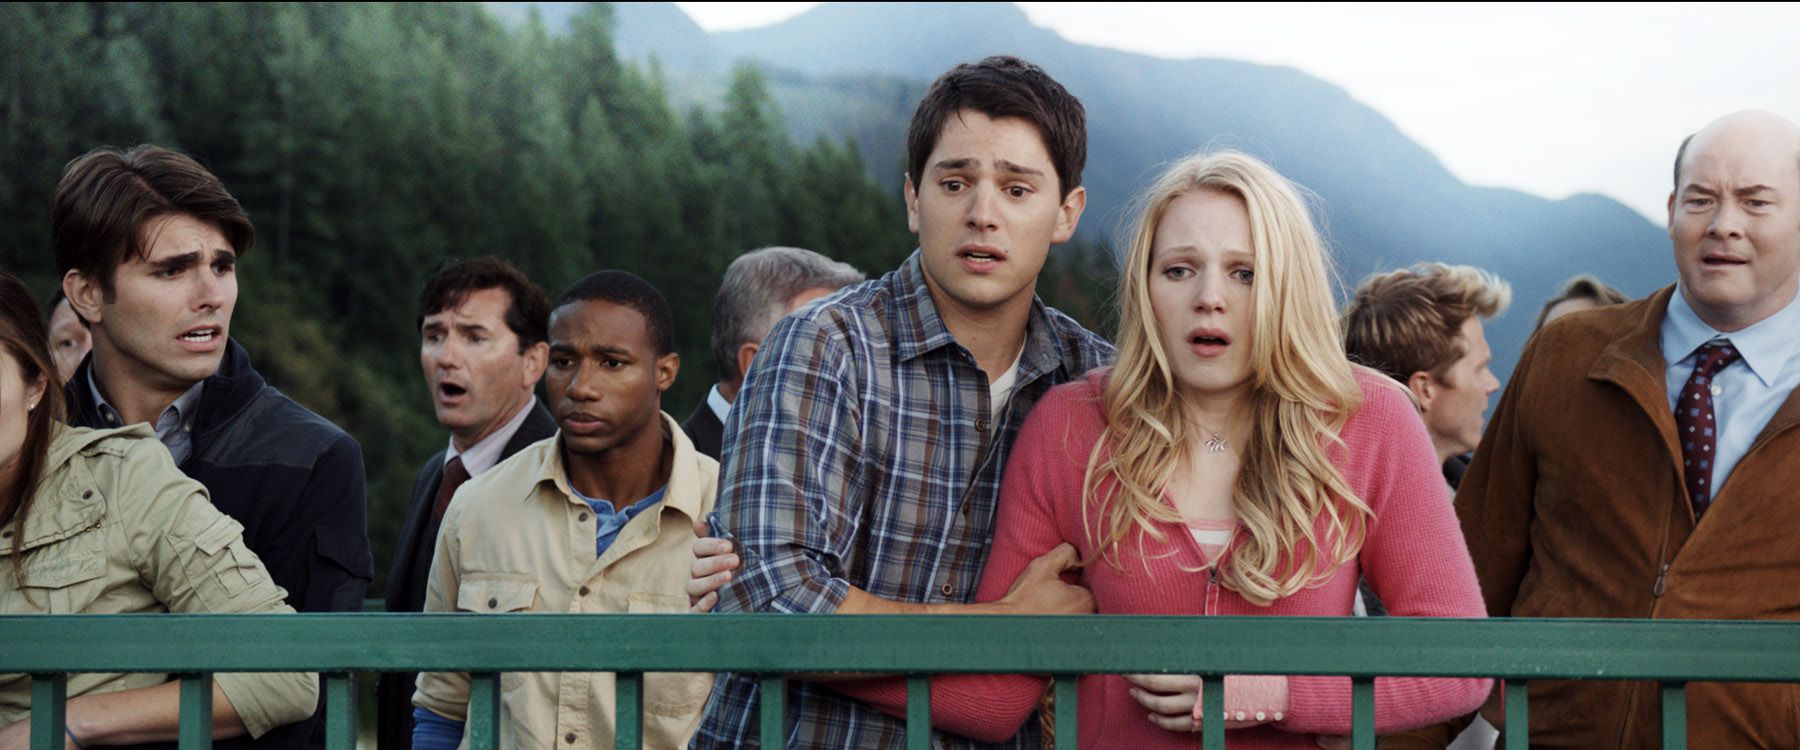 Nicholas D'Agosto and Emma Bell star in Final Destination 5{27} also discussed what its been like for him to make a horror film as apposed to a comedy. It's fantastic. I believe as actors we just want to play and yesterday I was in make-up for three hours. Then I had a break, and then I was back in make-up for another hour. I was there all day long, and people were like, is that awful? Is it uncomfortable? It's like, no, we're actors, this is what we want to do! You just get to play. So just an 